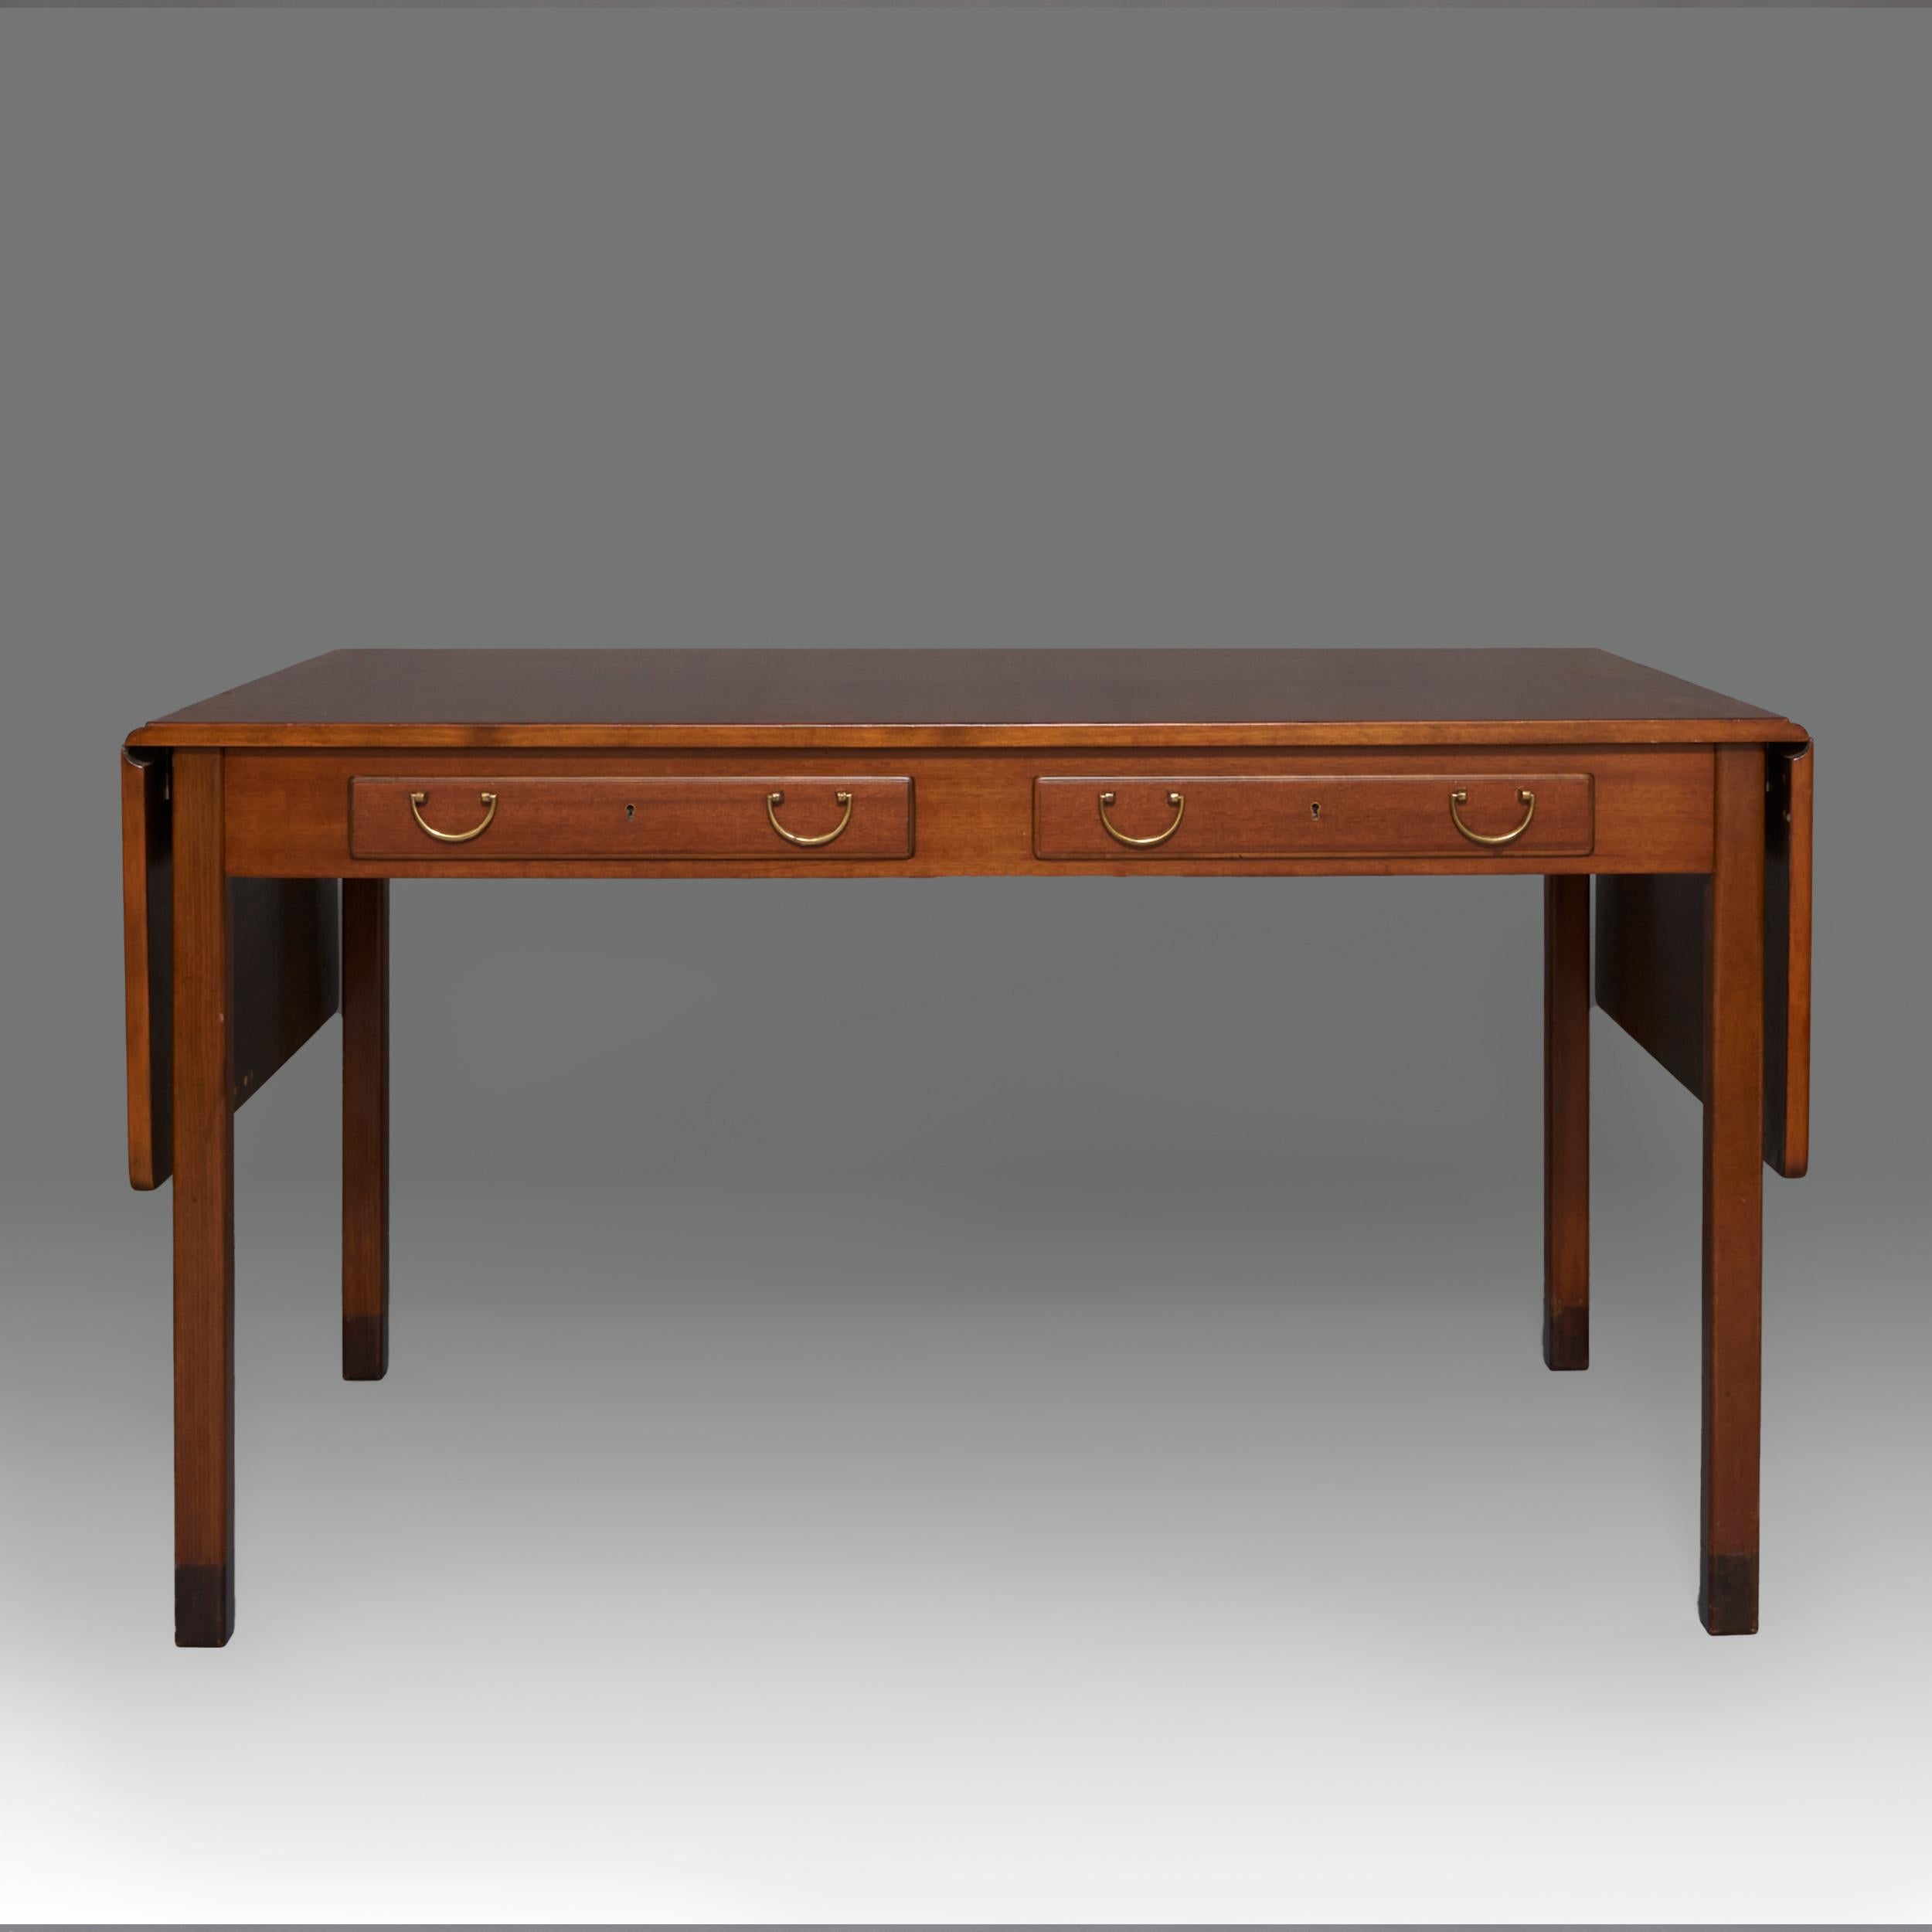 Writing desk in teak and beech with end extensions and two drawers by David Rosen for Nordiska Kompaniet. Sweden 50s. Fully restored.
David Rosen was a Swedish designer whose work is well-known in spite of his obscure biography. He gained